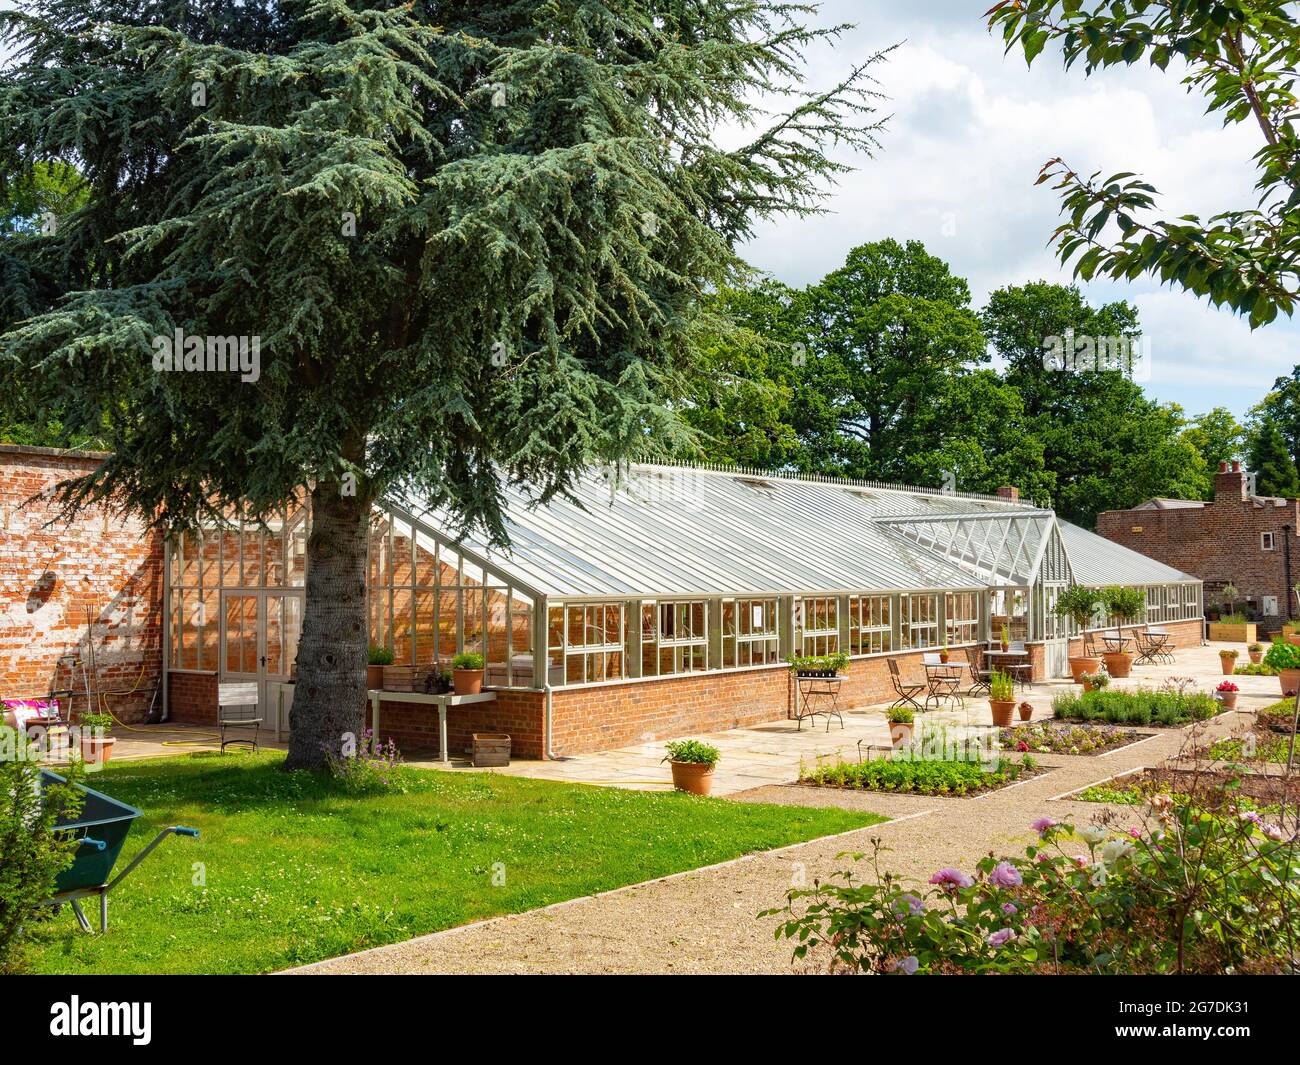 The Victorian Greenhouse at the Walled Rose Gardan Wynyard Hall Tees Valley England UK is used for selling household goods and provides a small café Stock Photo